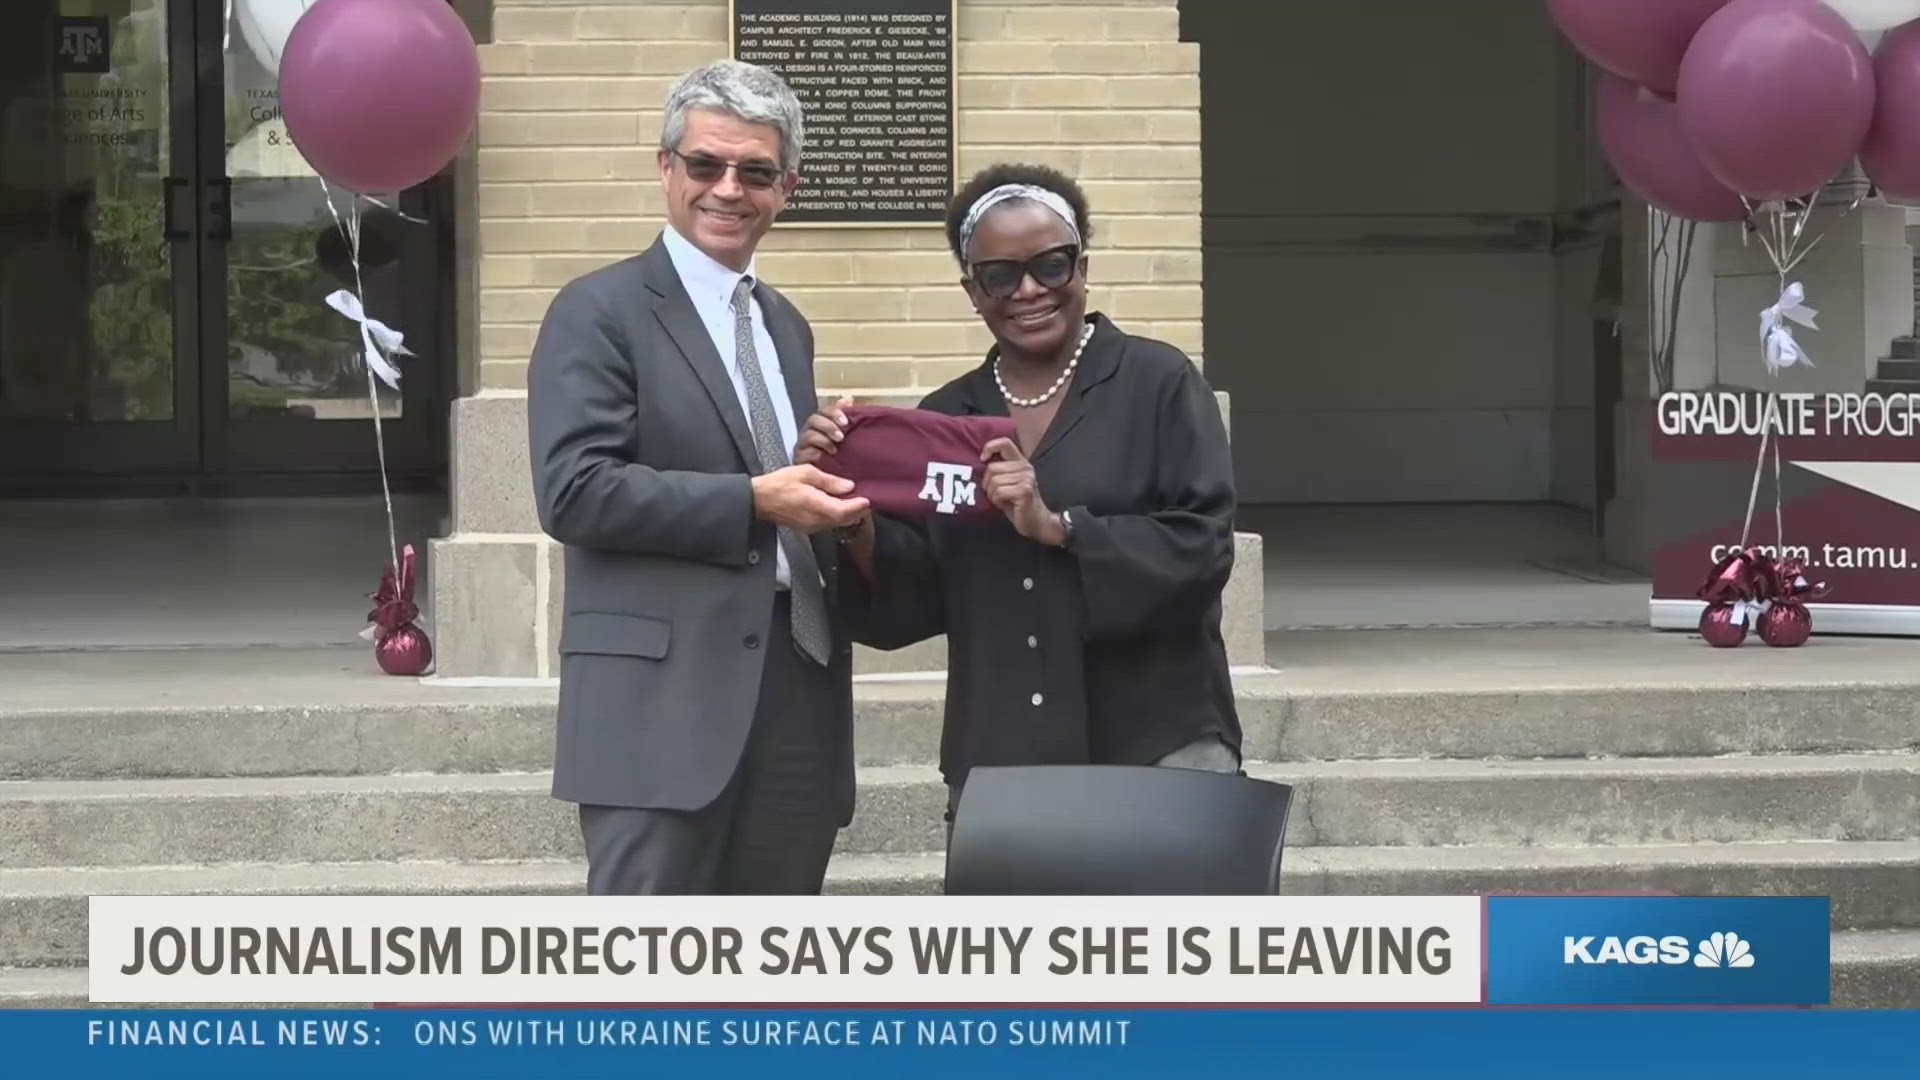 According to McElroy, her relationship began to change in June, when concerns were brought up within A&M's administration about her past as well as race and gender.